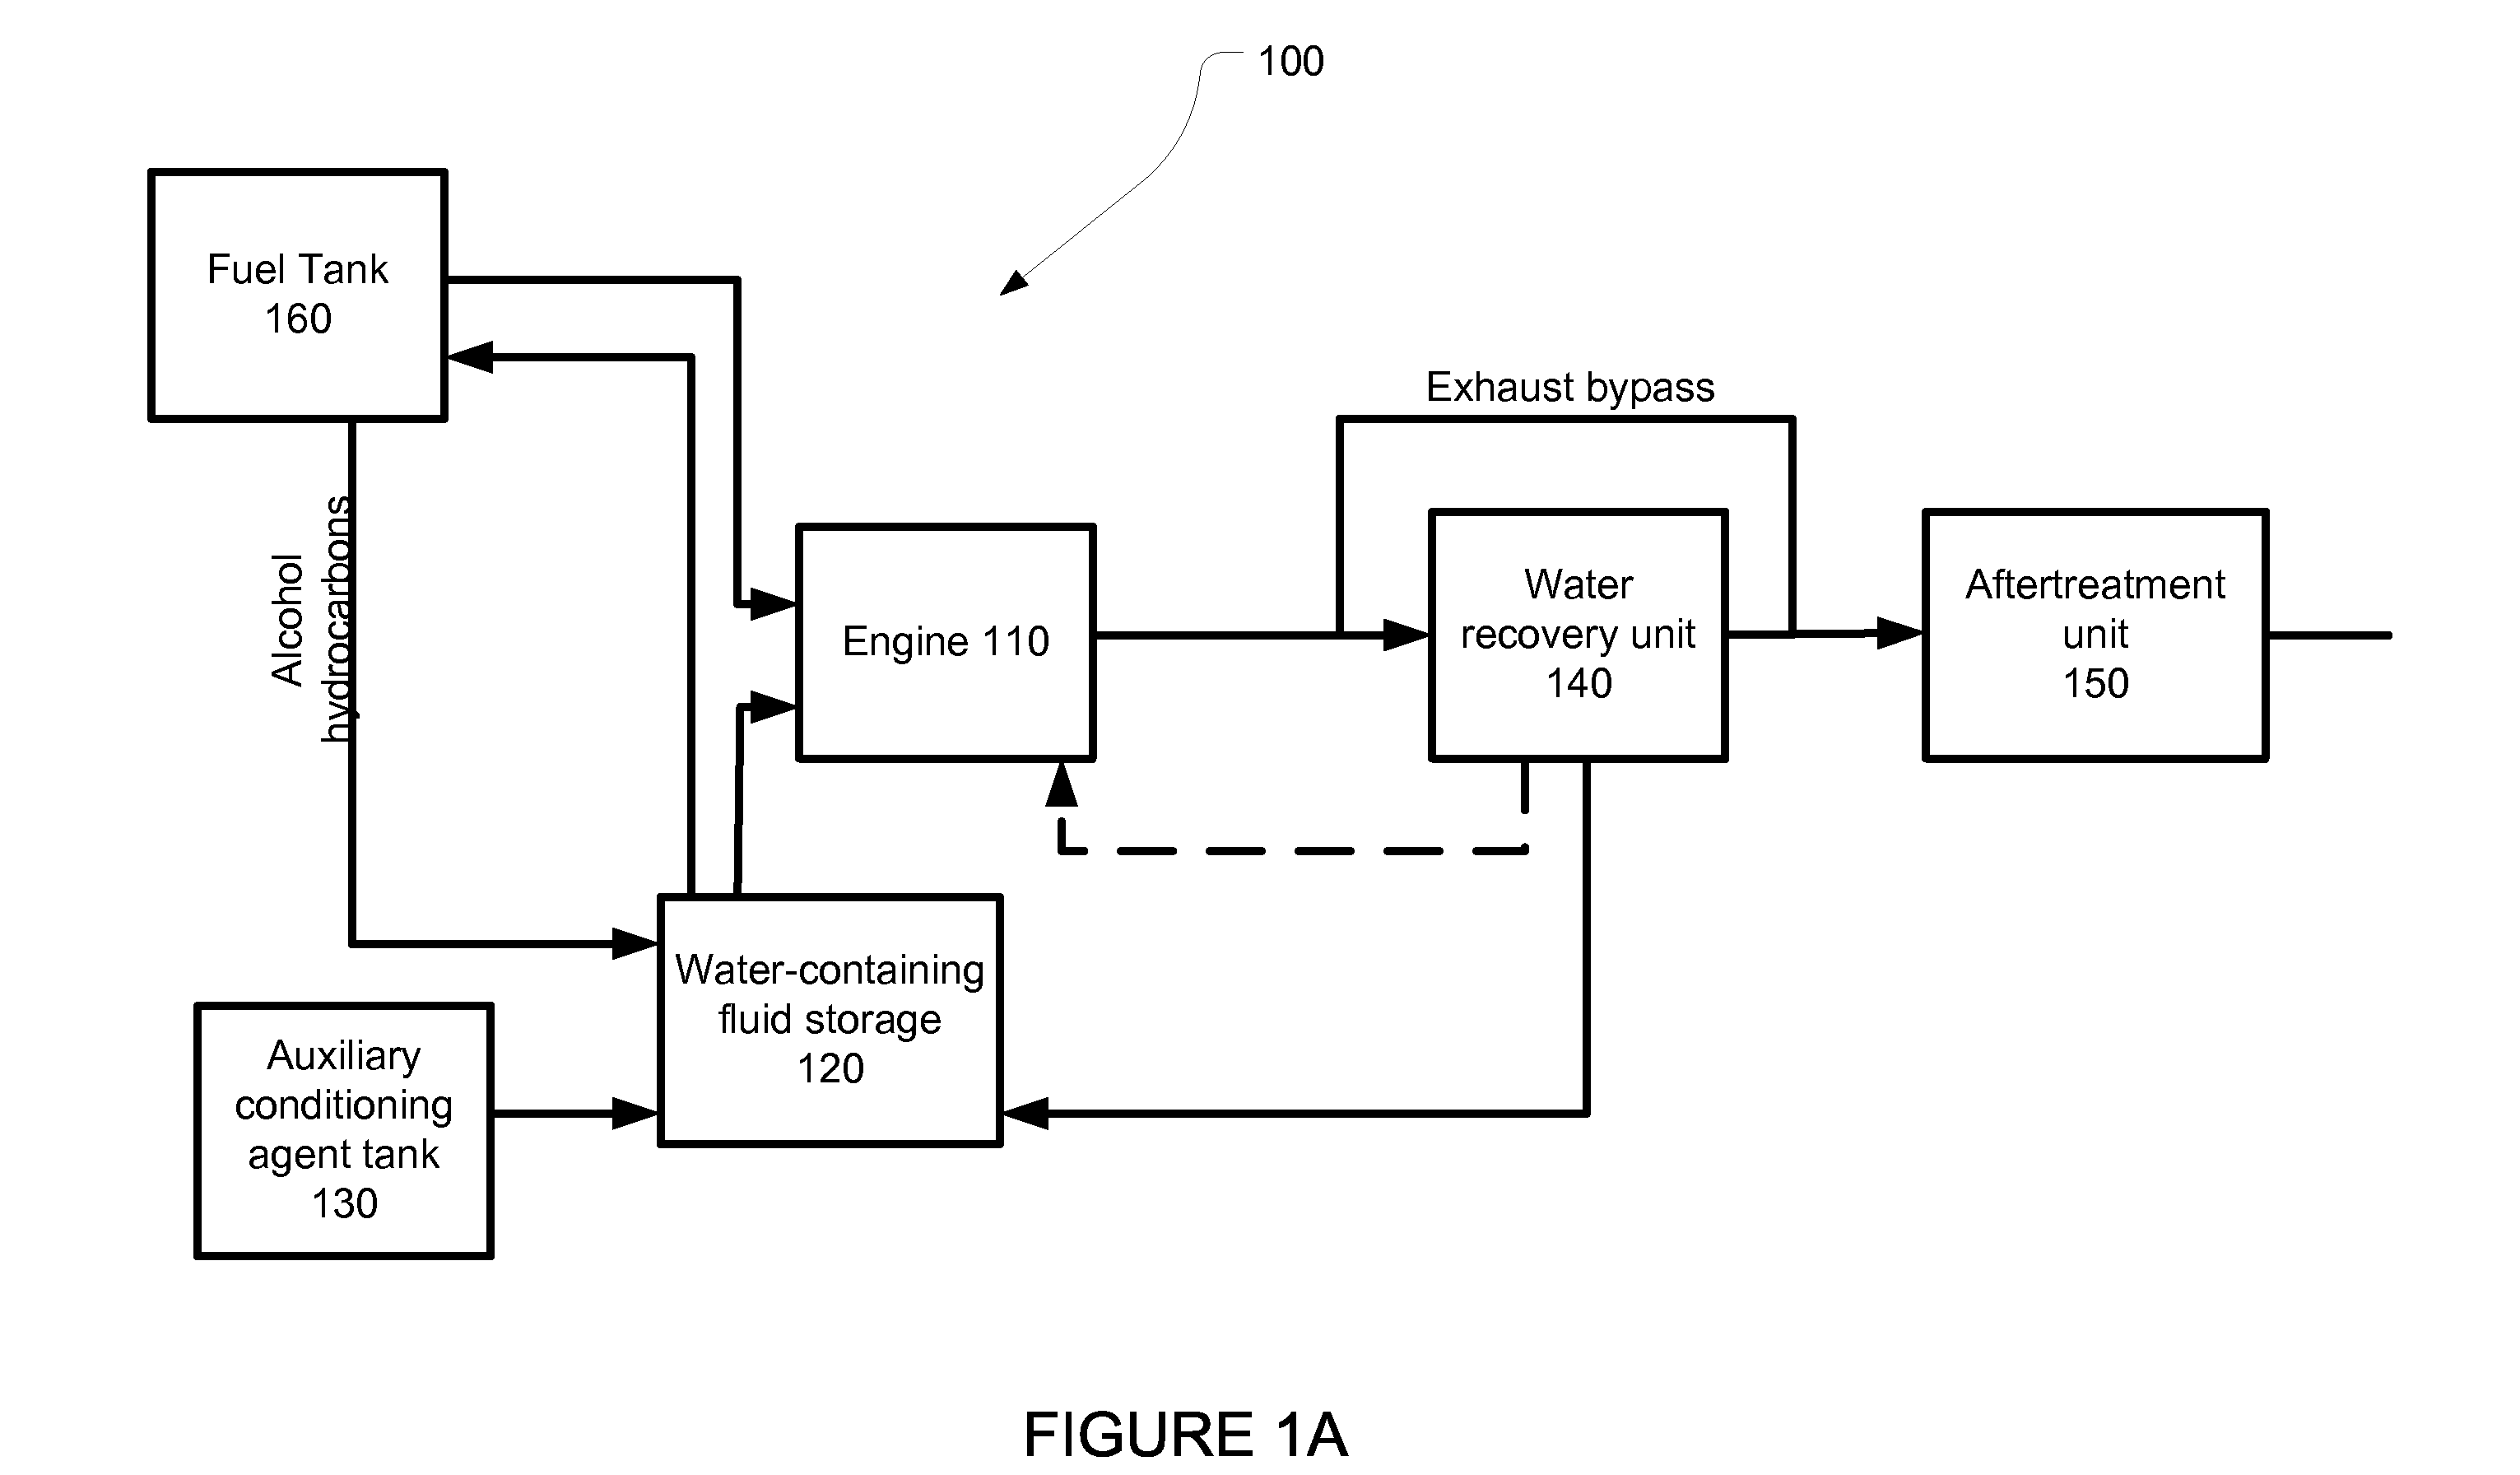 System for Variable Blending Of Ethanol And Exhaust Water For Use As An Anti-Knock Agent